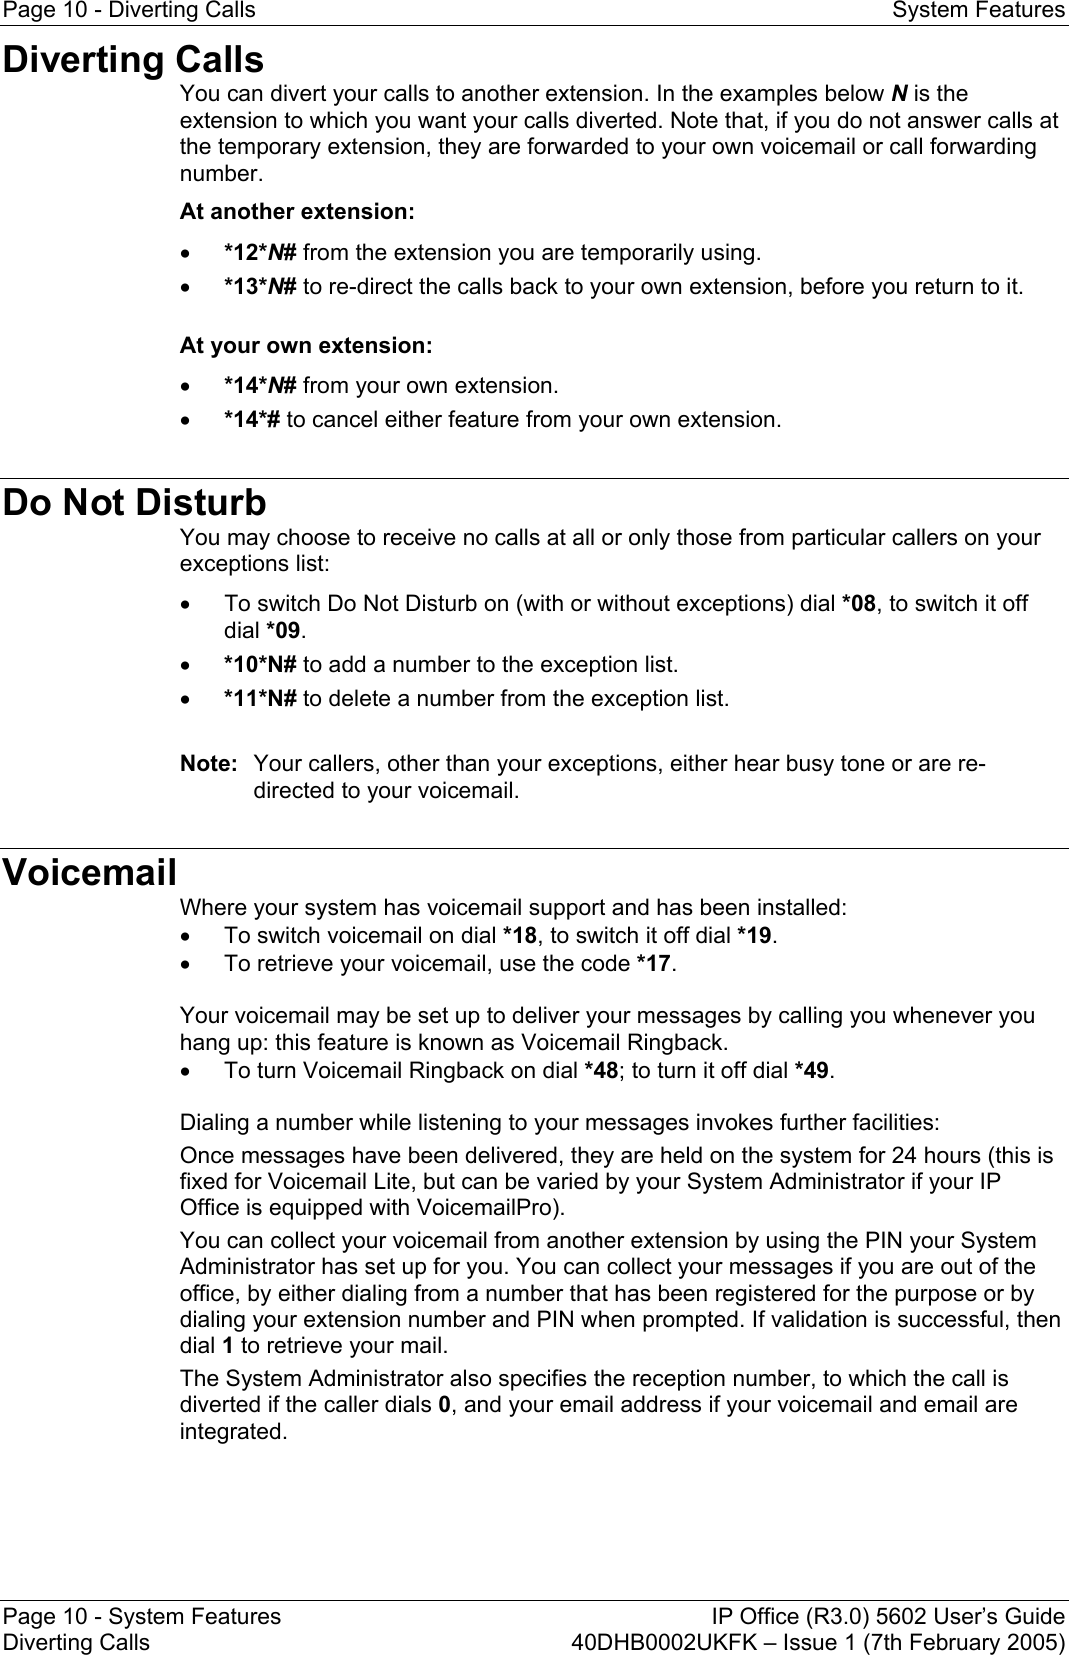 Avaya Ip Office Voicemail User Manual